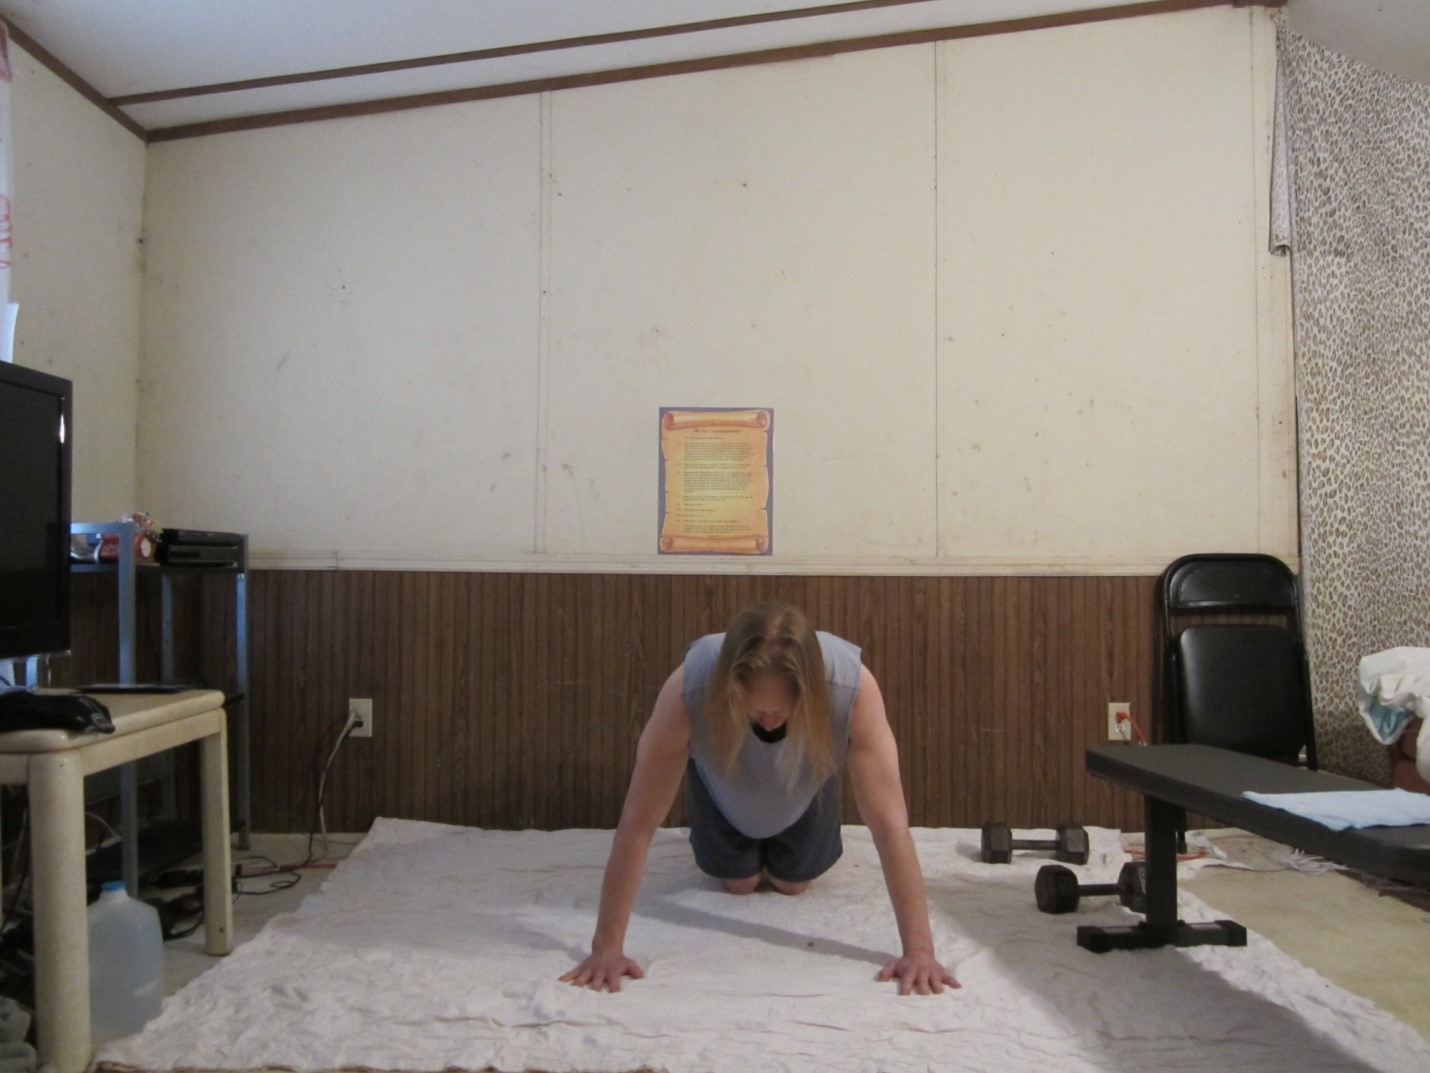 Bent knee push up picture demonstrating the end of the repetition from a front viewpoint.